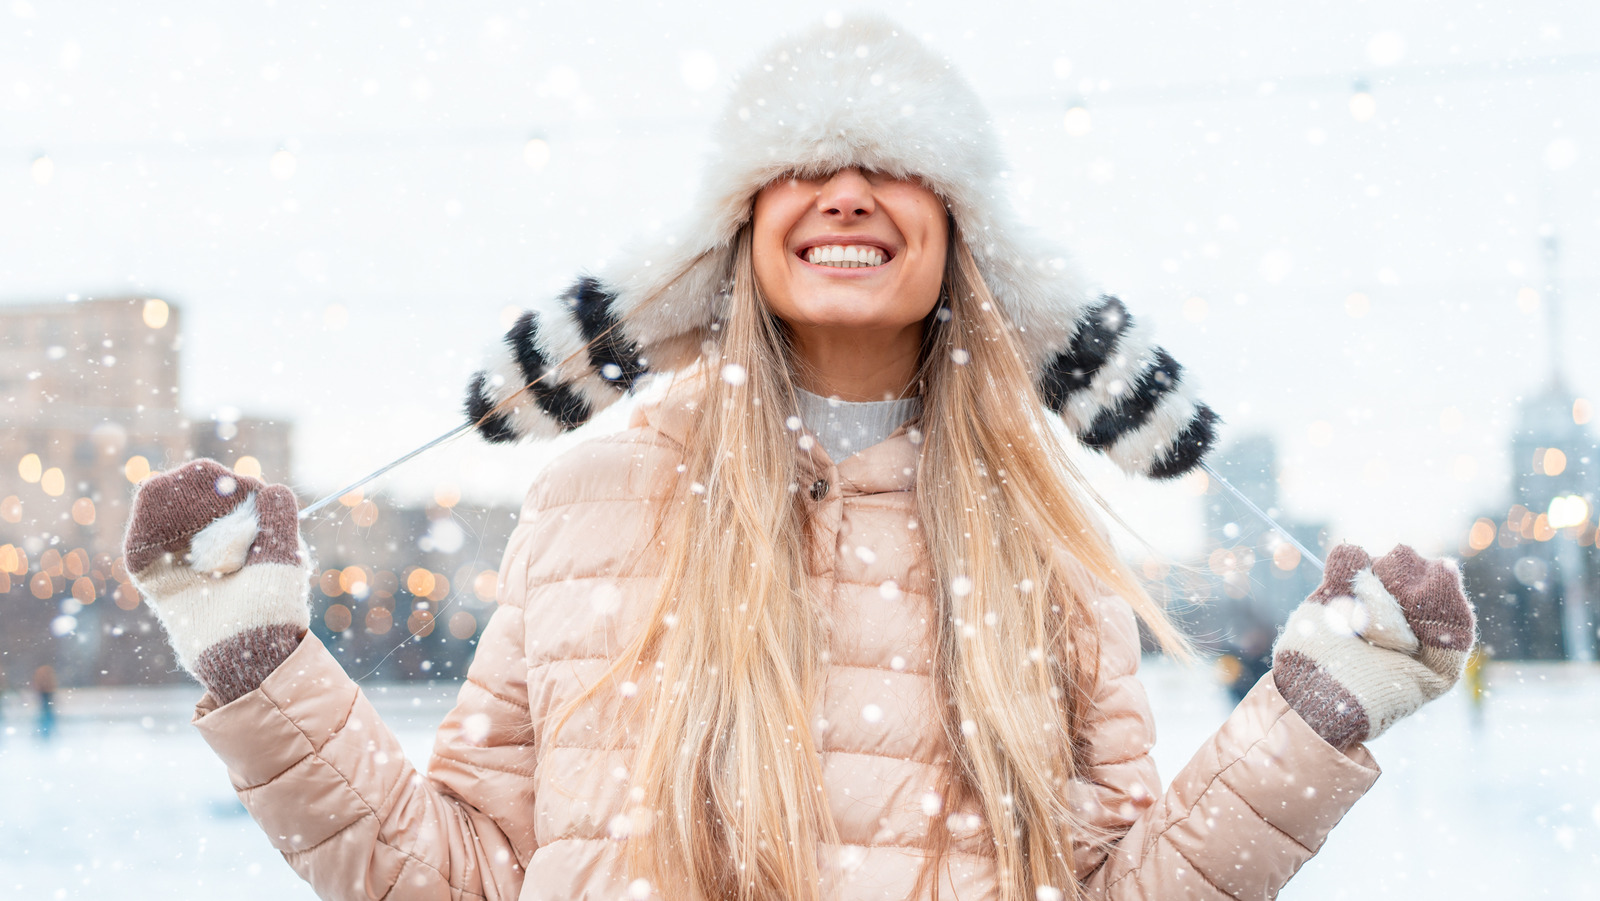 The Winter Fashion Trend To Try Based On Your Zodiac Sign